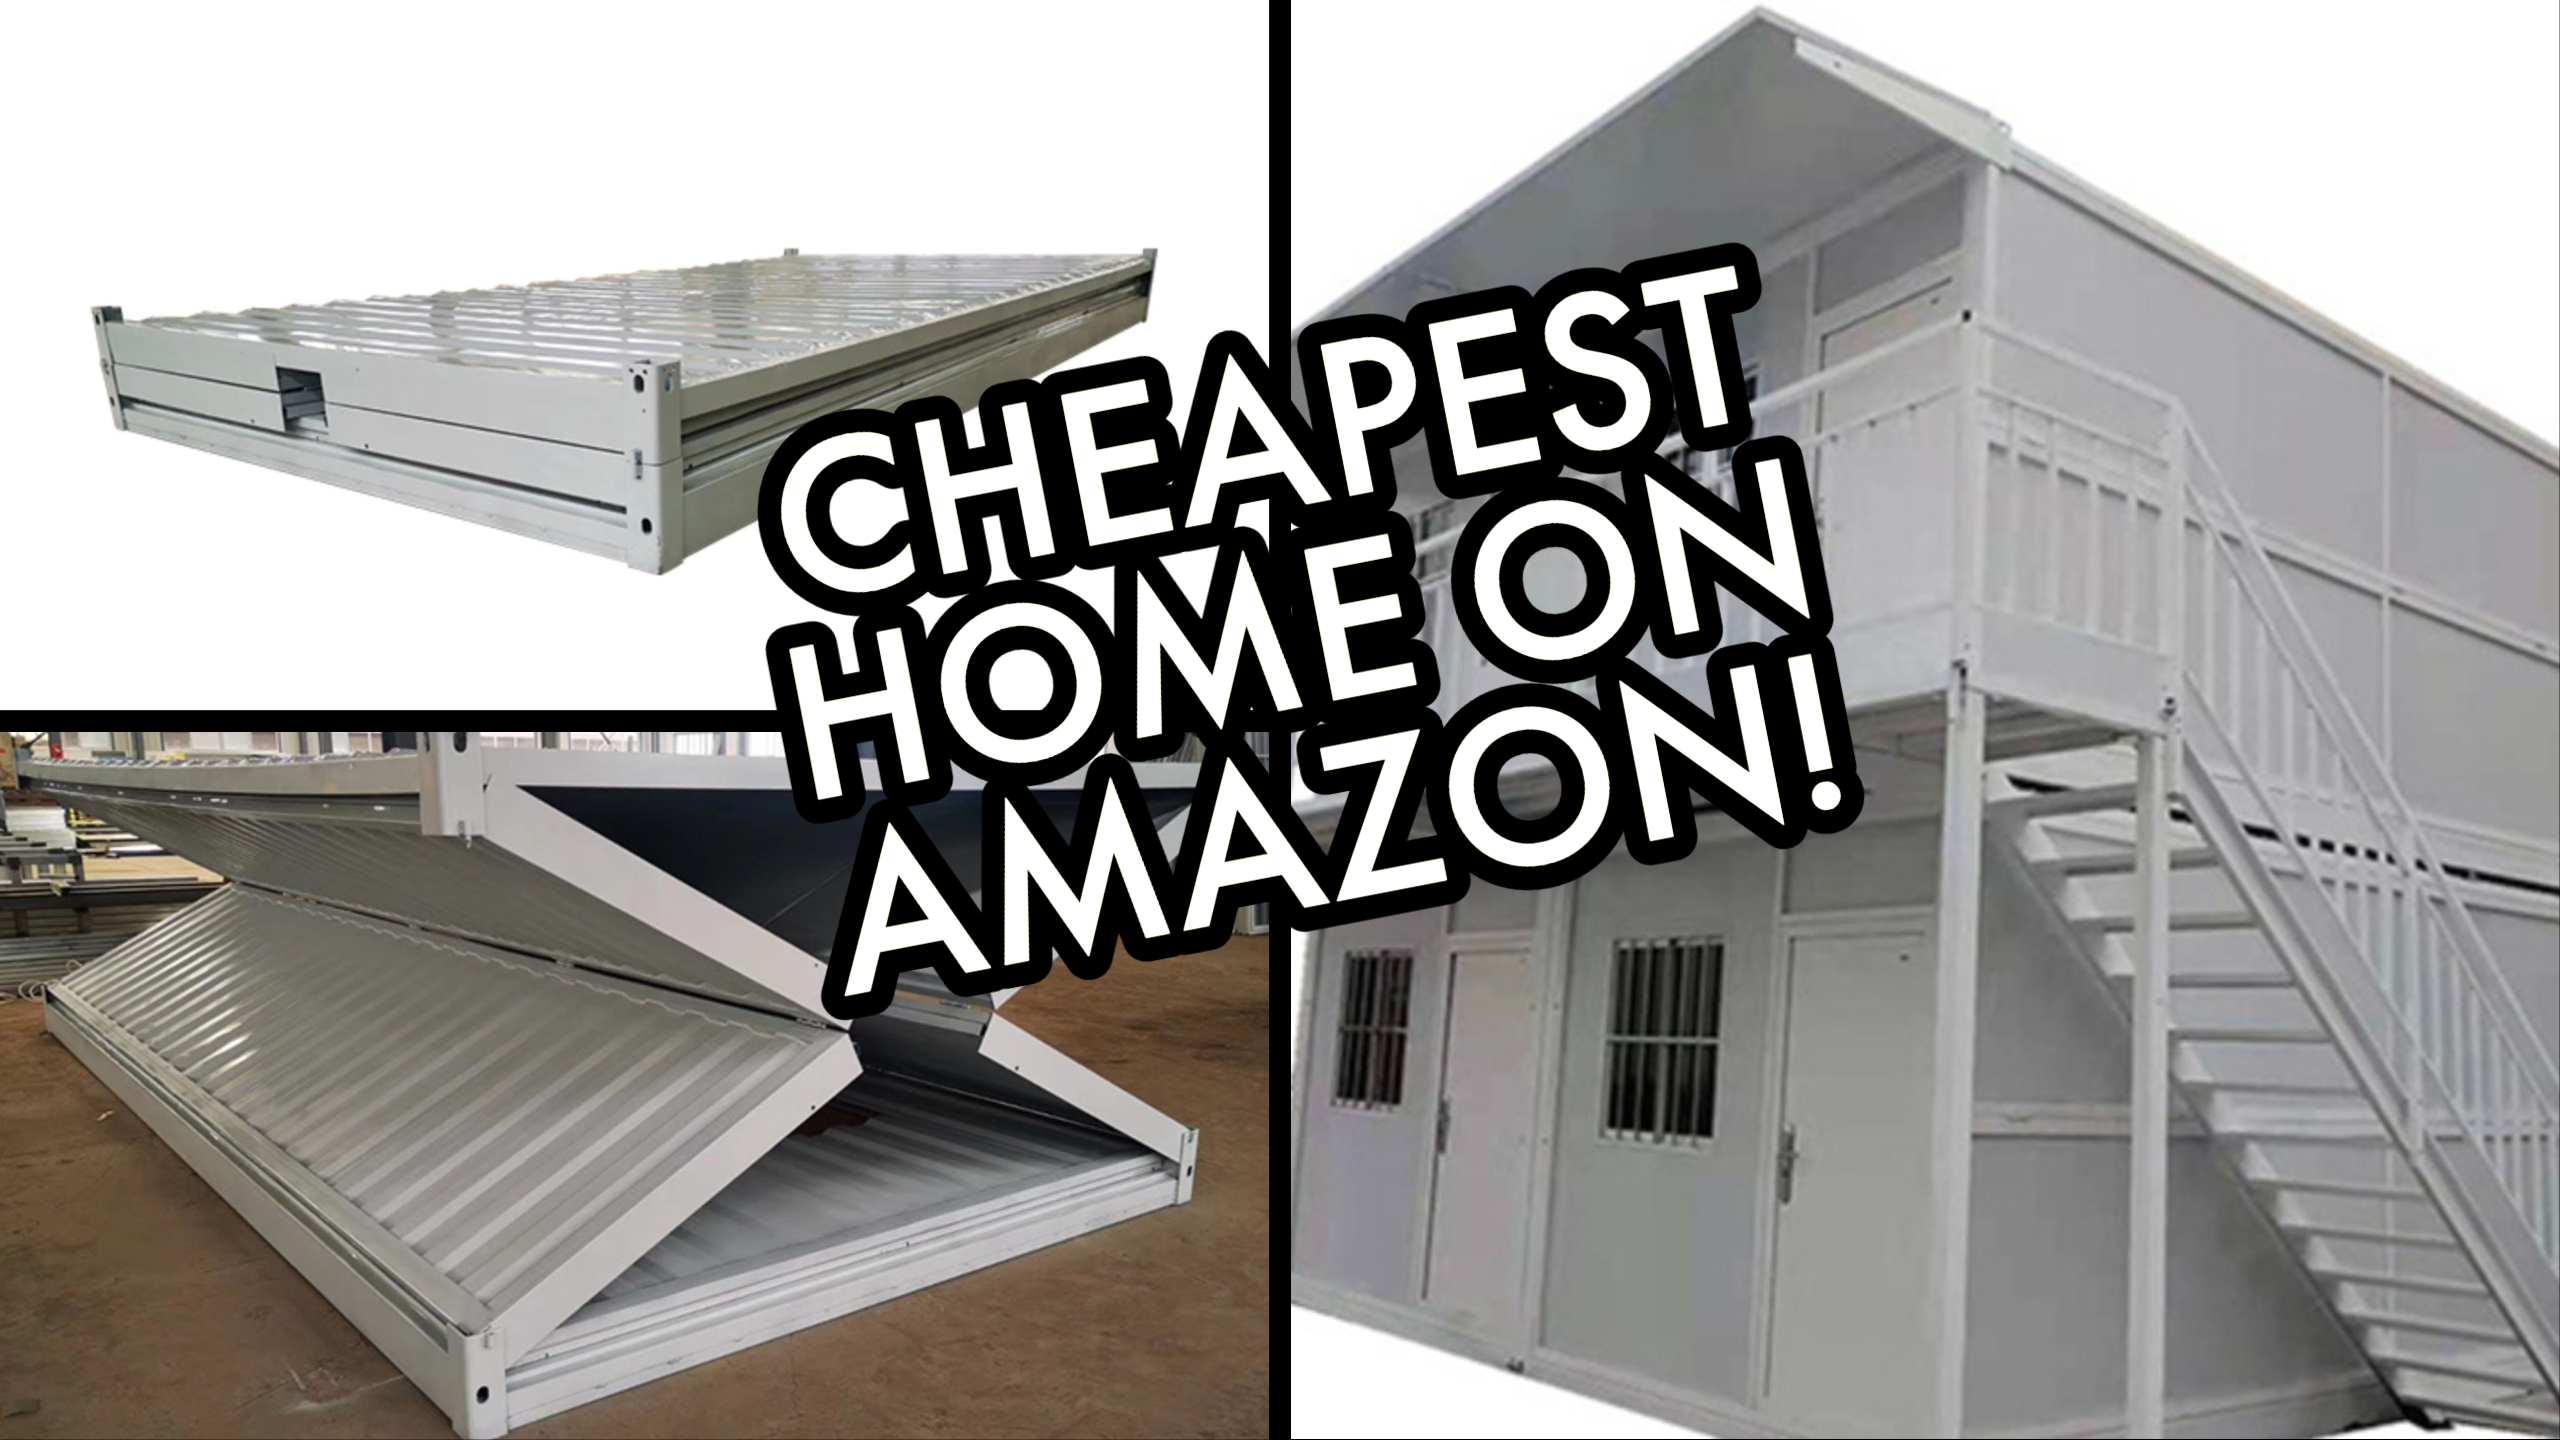 This Is The Cheapest Prefabricated Home On Amazon And It Does Things For Just 3400 217115 1 